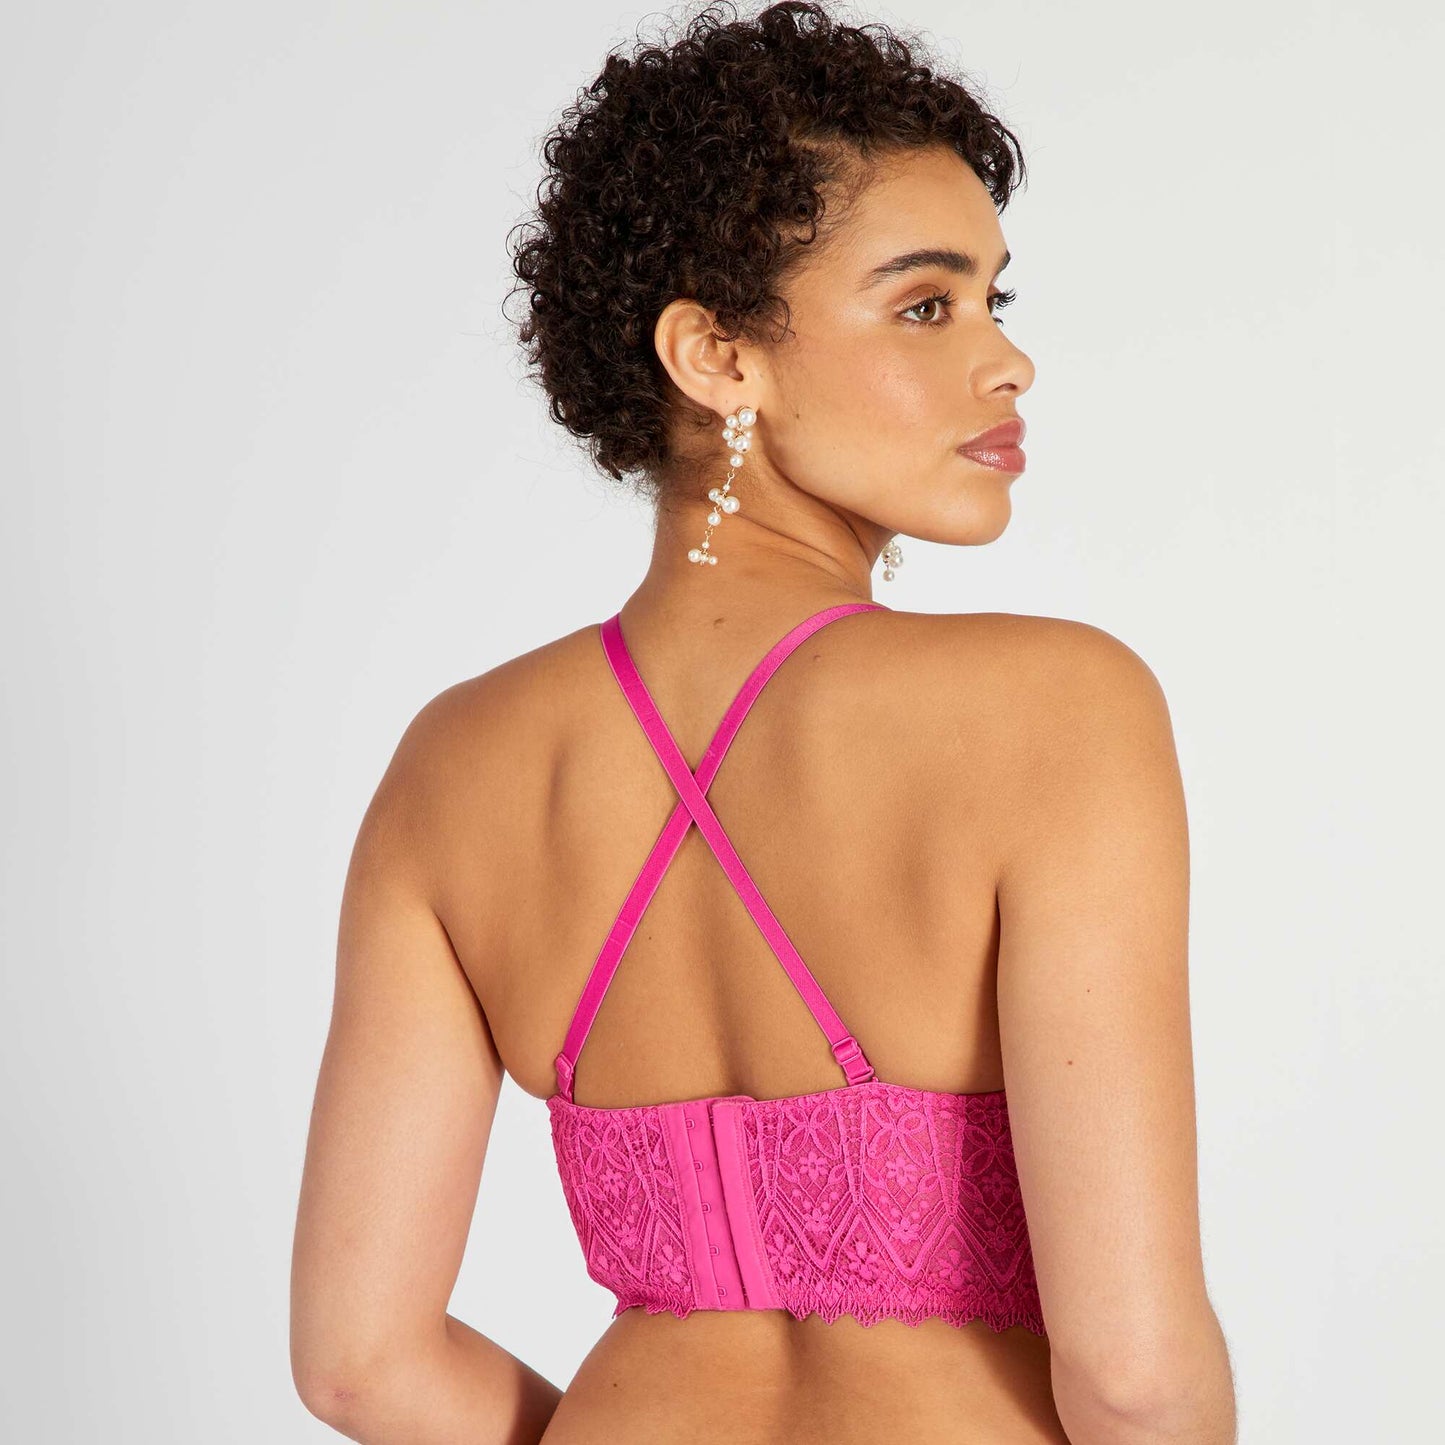 Lace bustier bra PINK BERRY